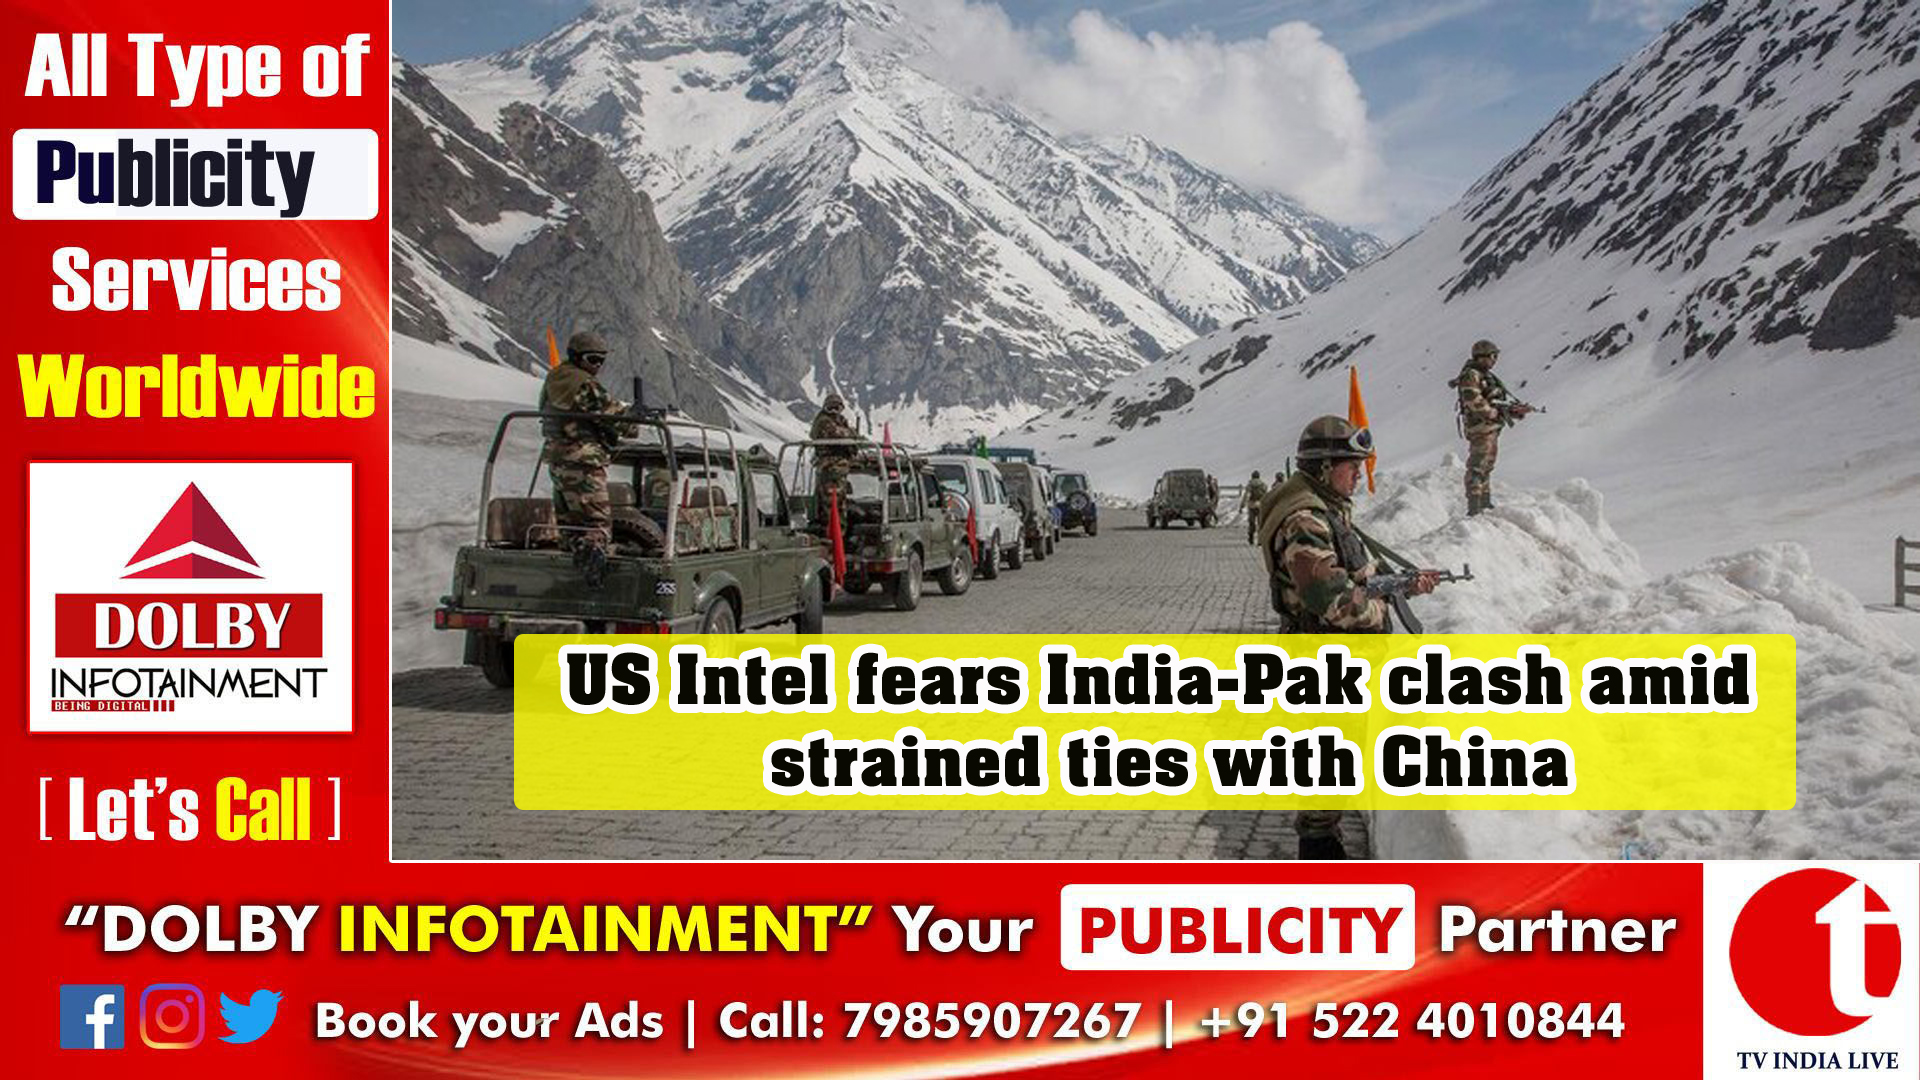 US Intel fears India-Pak clash amid strained ties with China